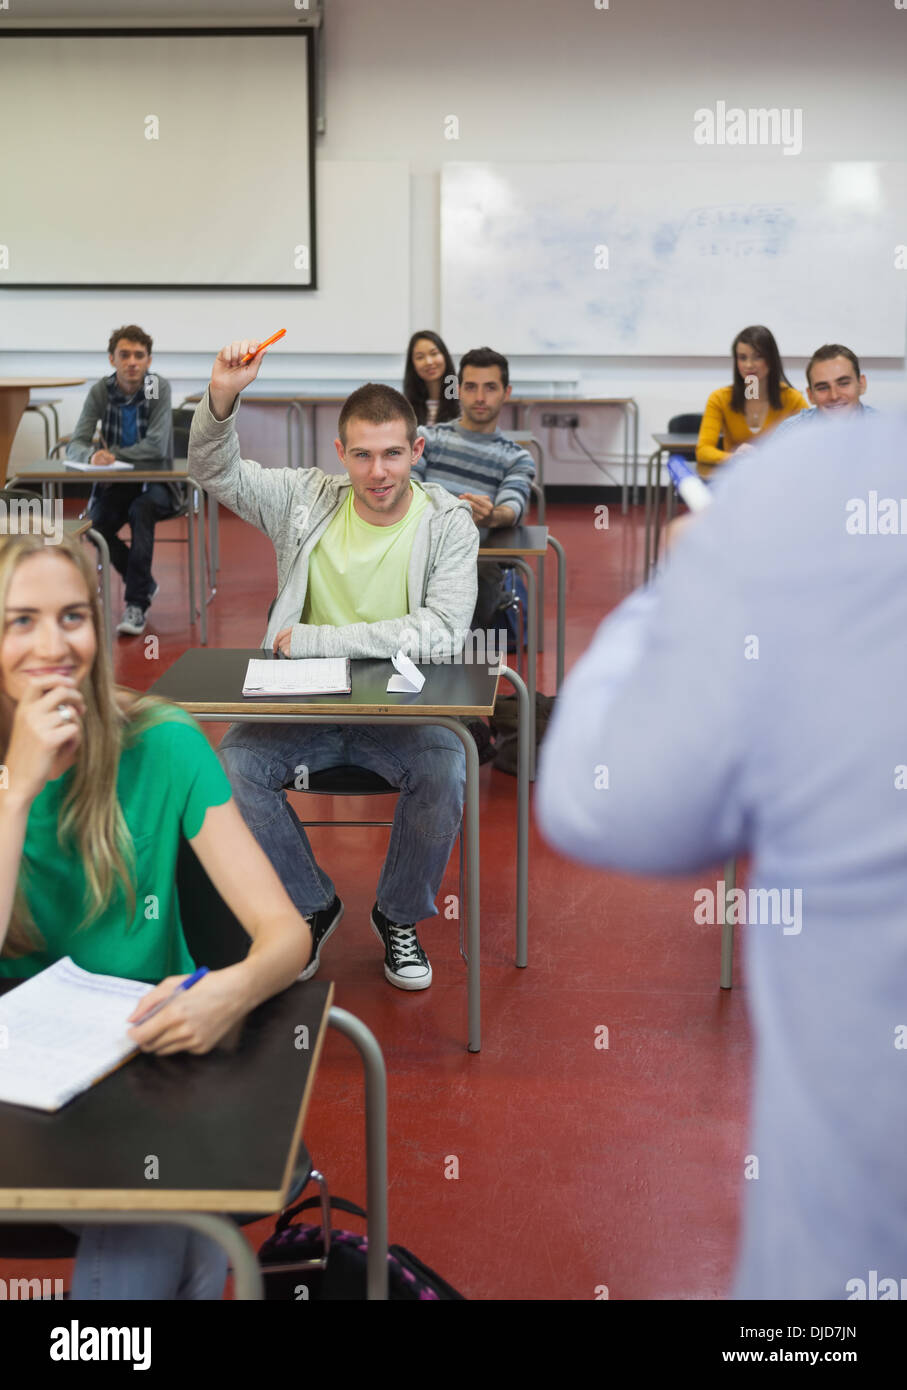 Student raising his hand to ask a question in classroom Stock Photo